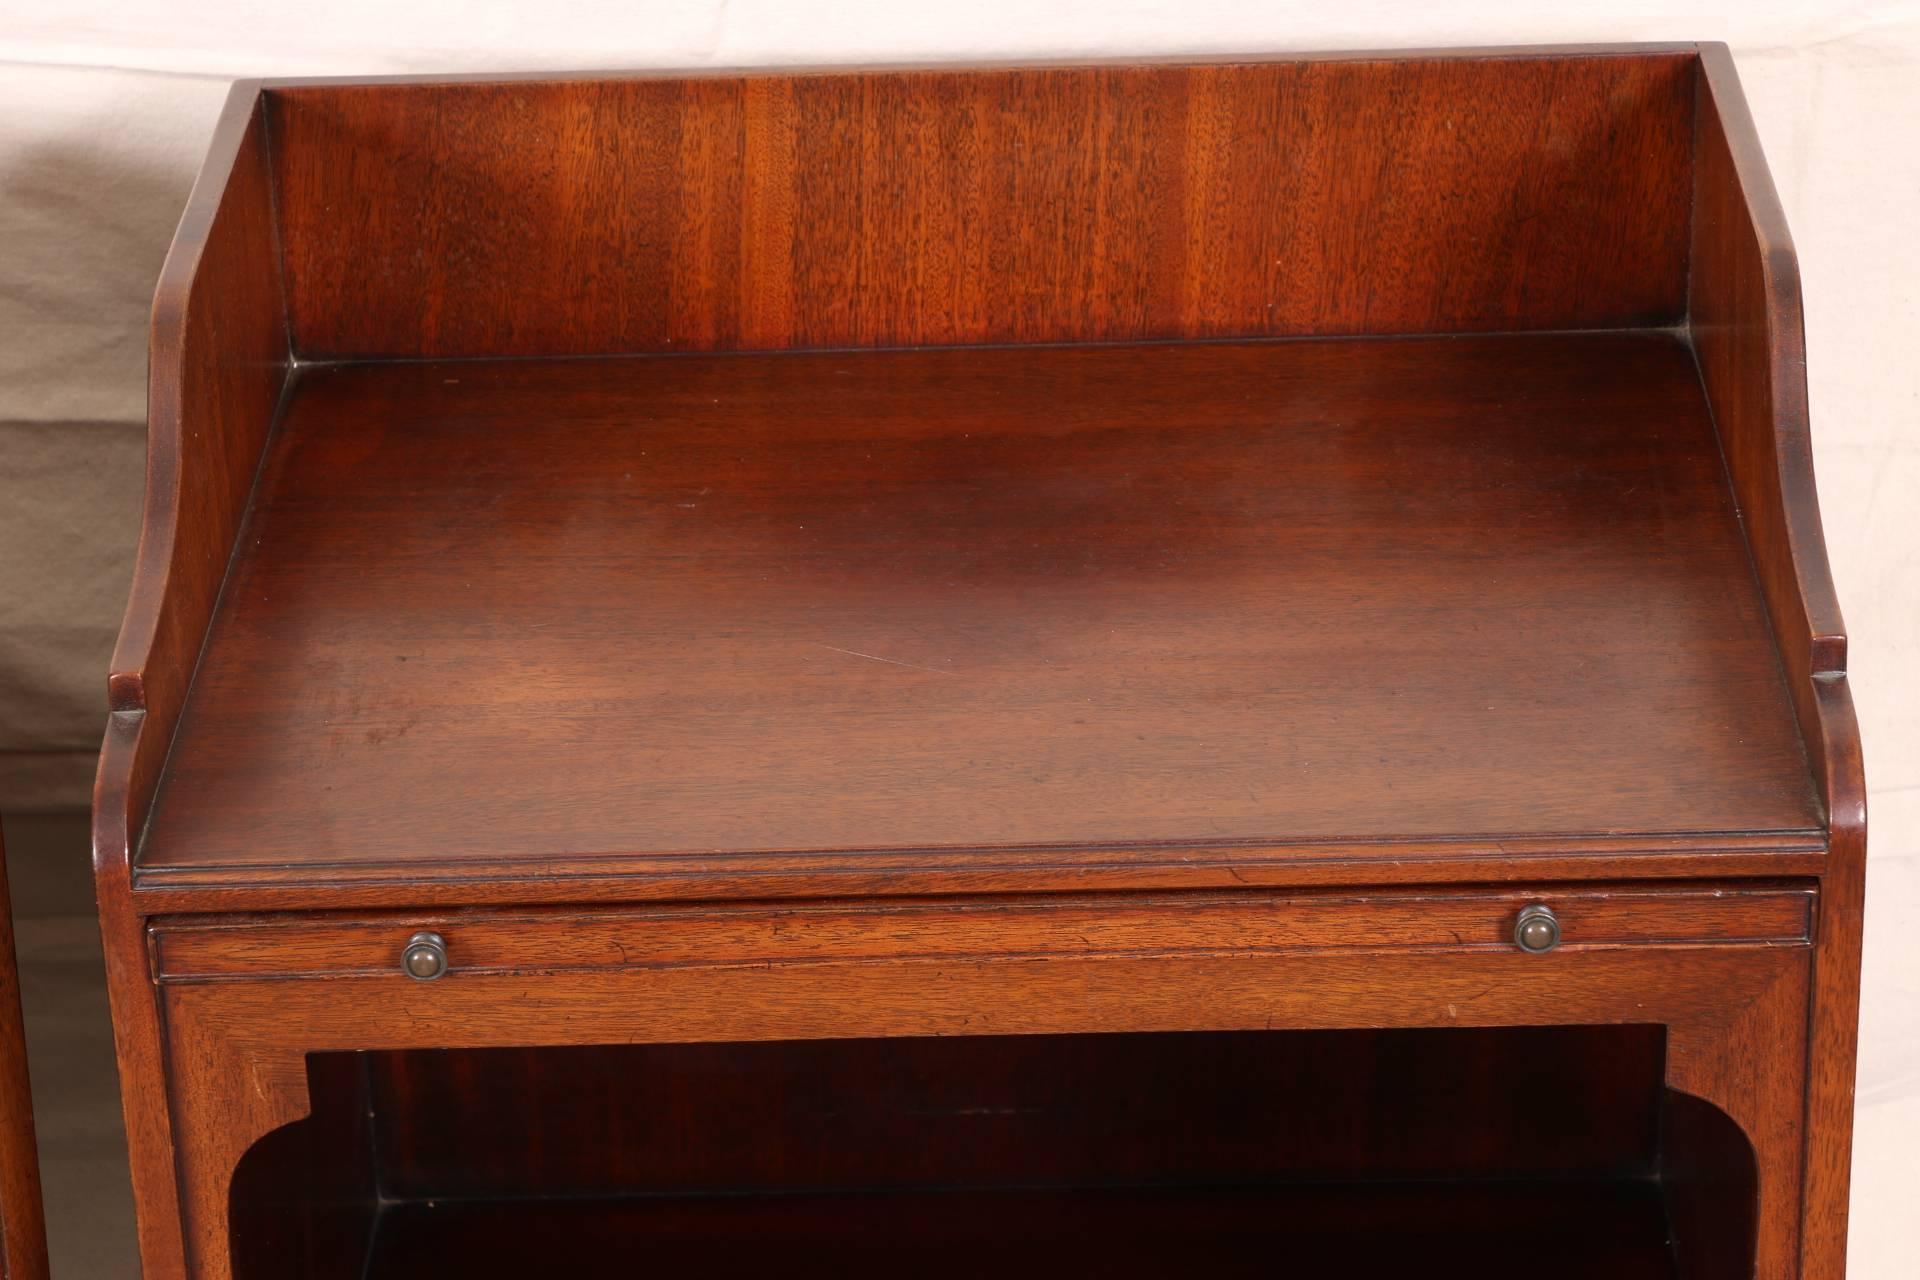 From the 'Beacon Hill Collection,' with 3/4 gallery tops, slide pull with tooled leather top, and large open fronts over a singe drawer. Raised on turned cylindrical legs on casters. Brass knob pulls and carry handles. 
Condition: some wear to the